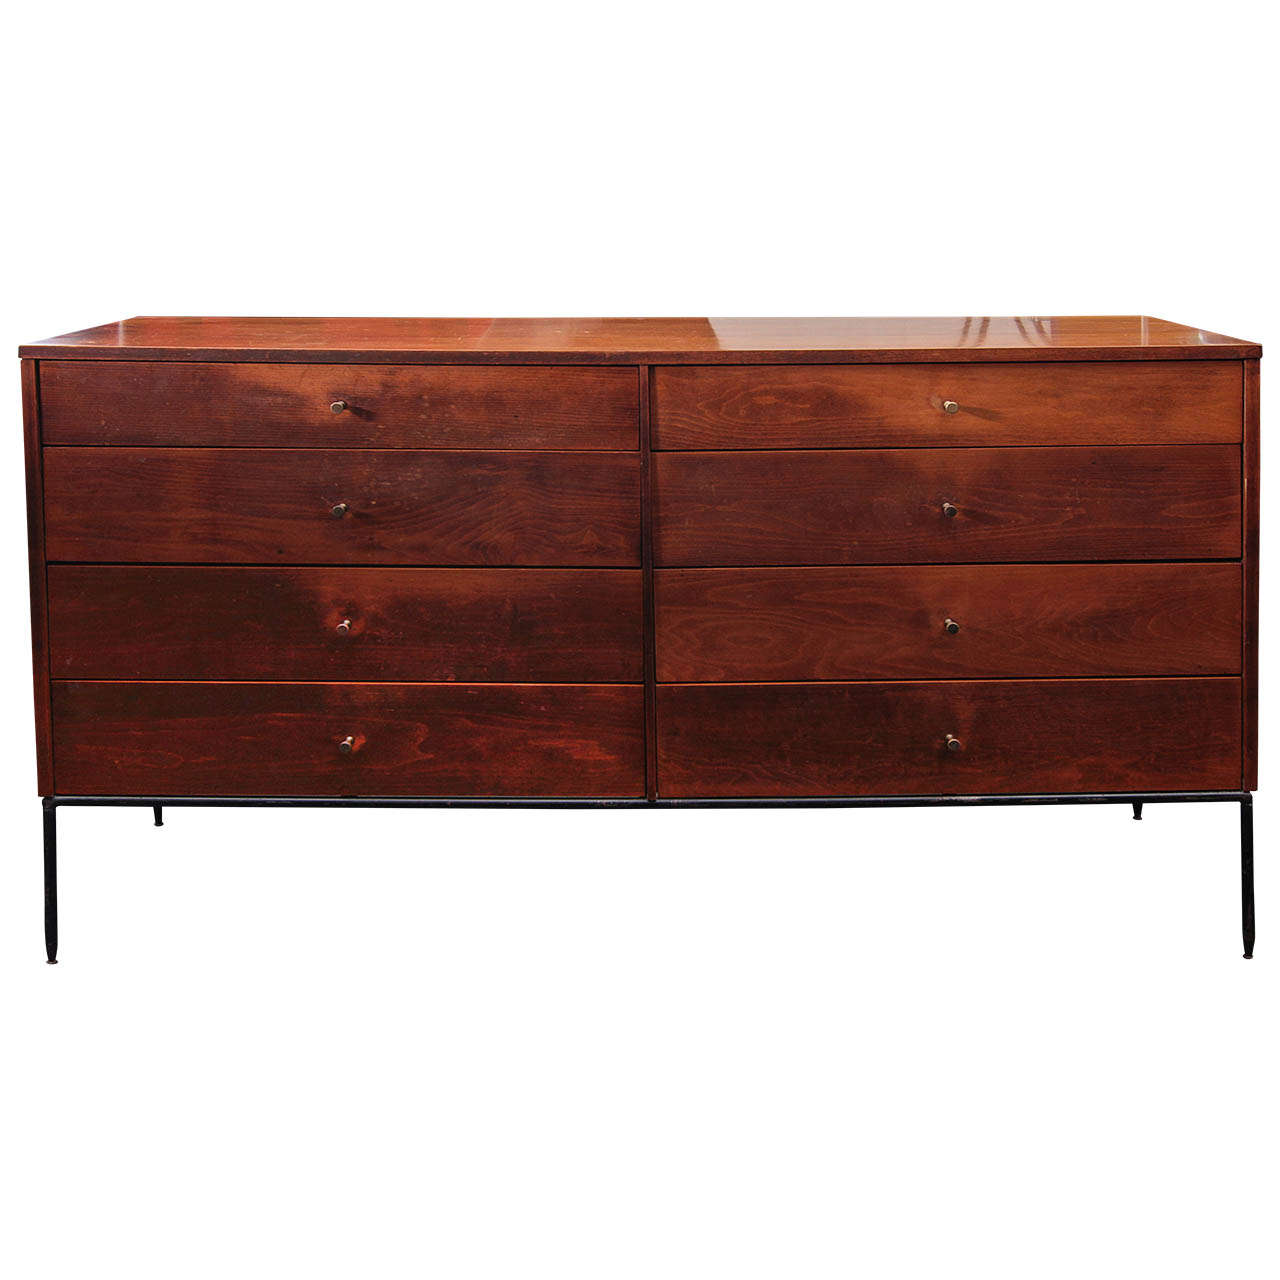 Paul McCobb Planner Group dresser in maple with brass handles and iron base